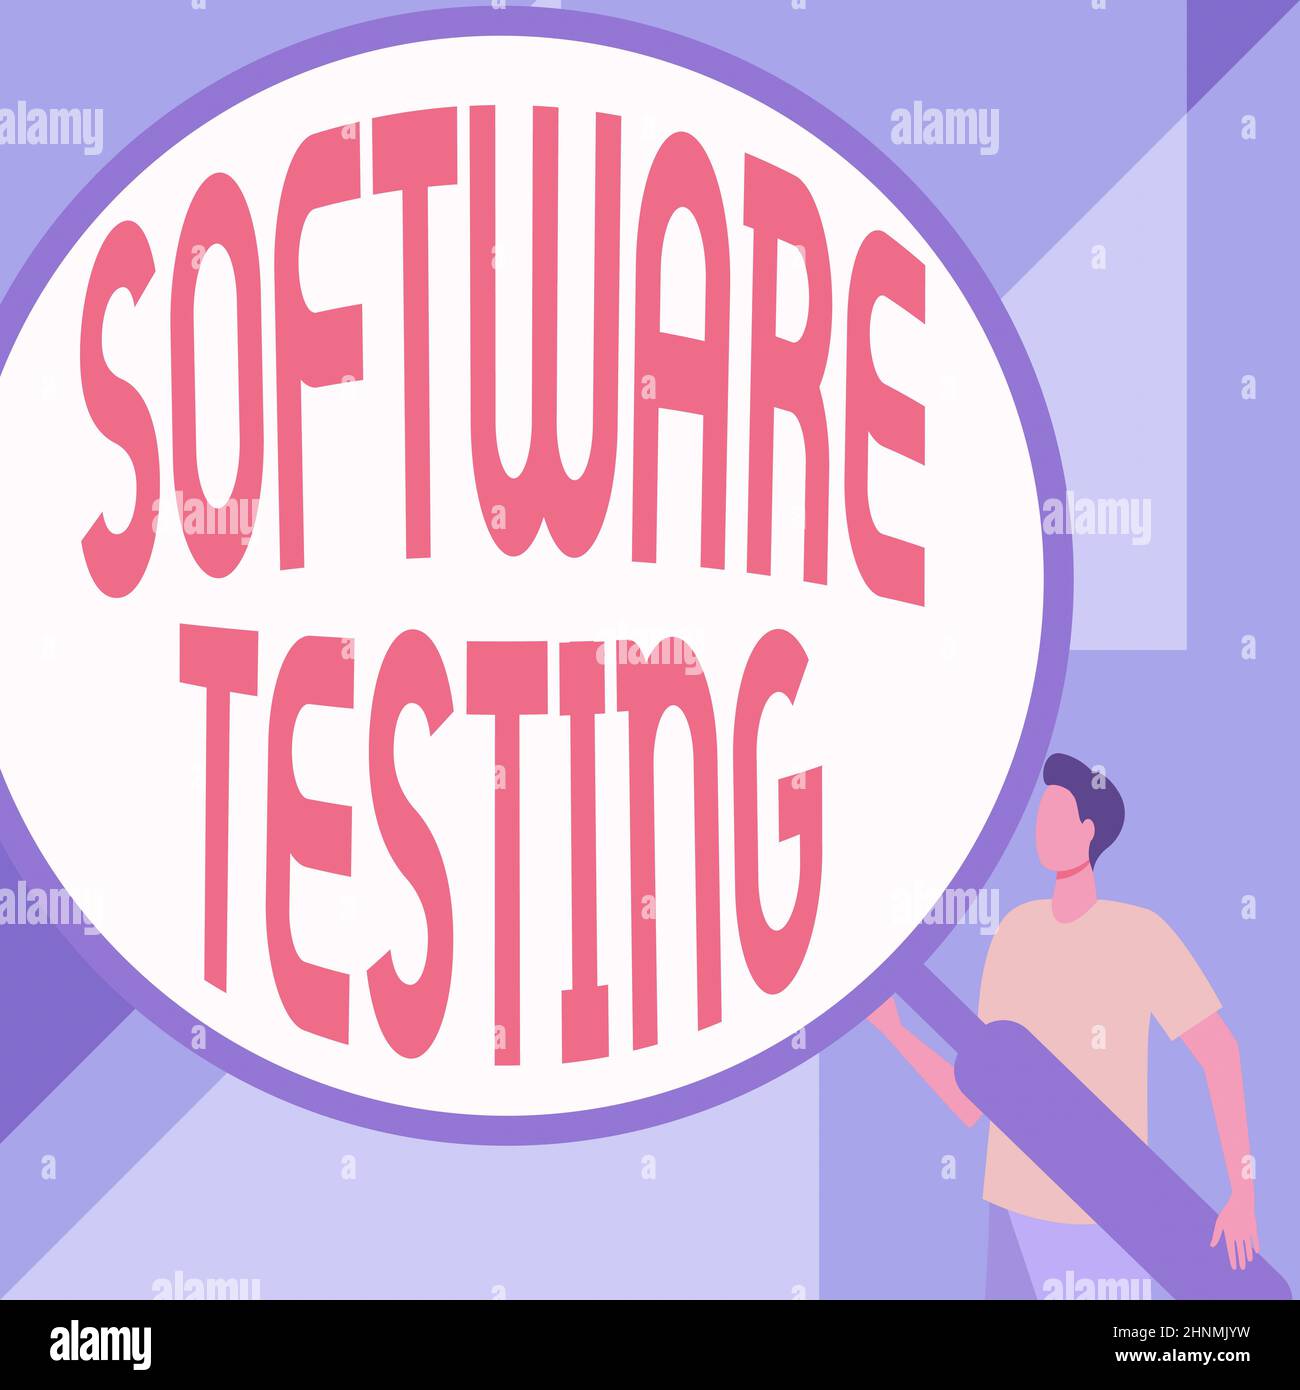 Inspiration showing sign Software Testing, Business overview evaluate the functionality of a software application Gentleman Drawing Standing Holding L Stock Photo